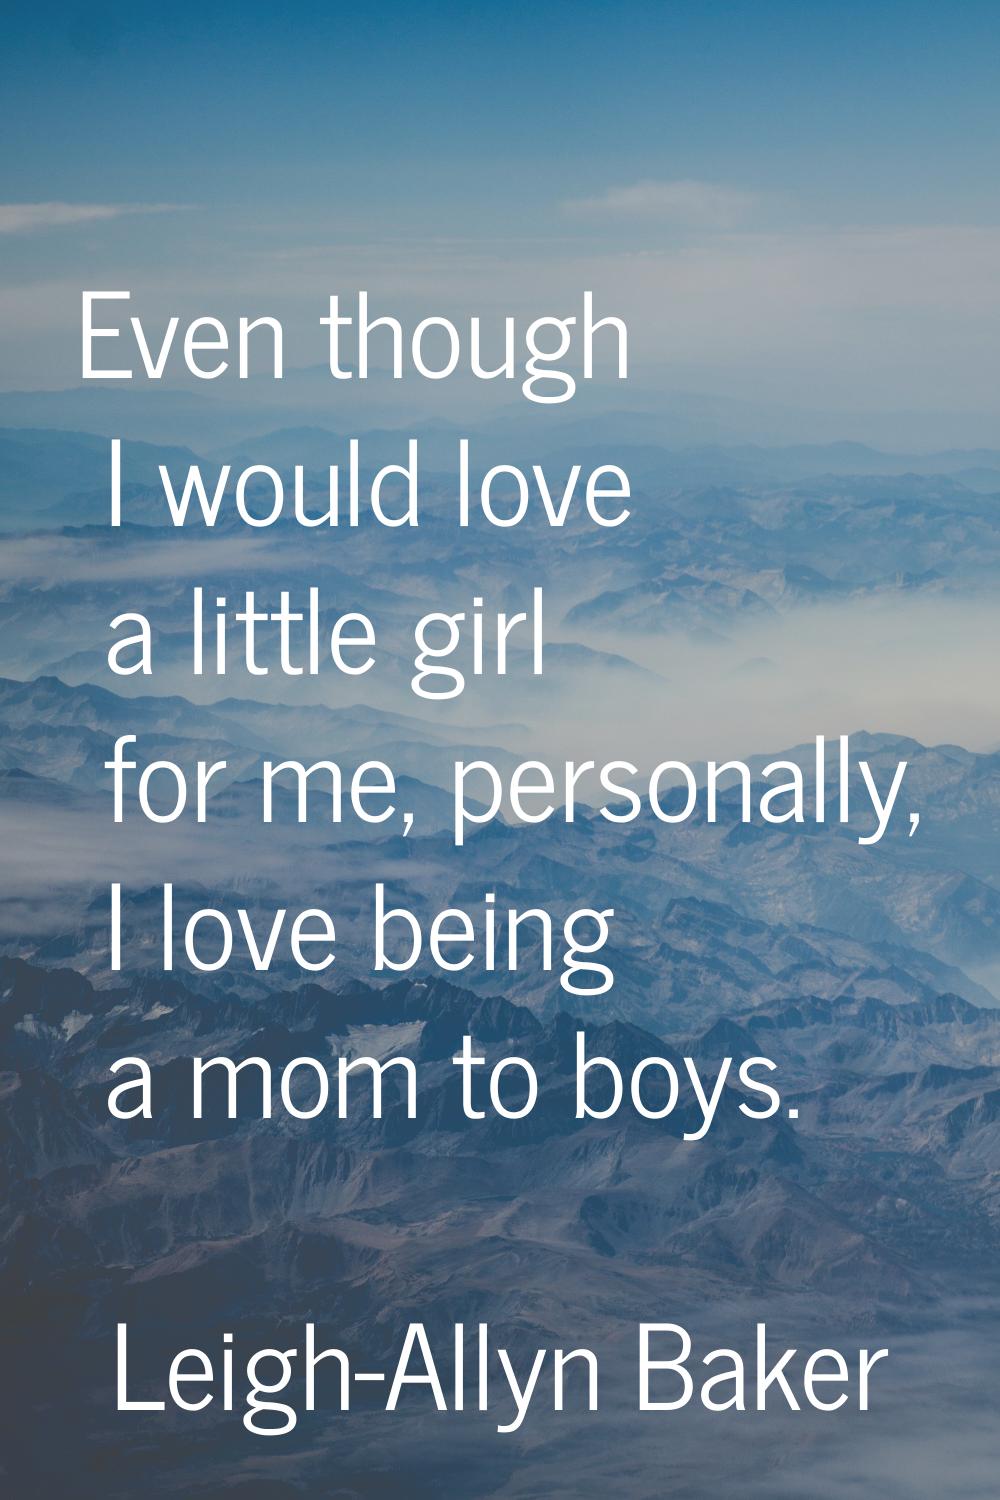 Even though I would love a little girl for me, personally, I love being a mom to boys.